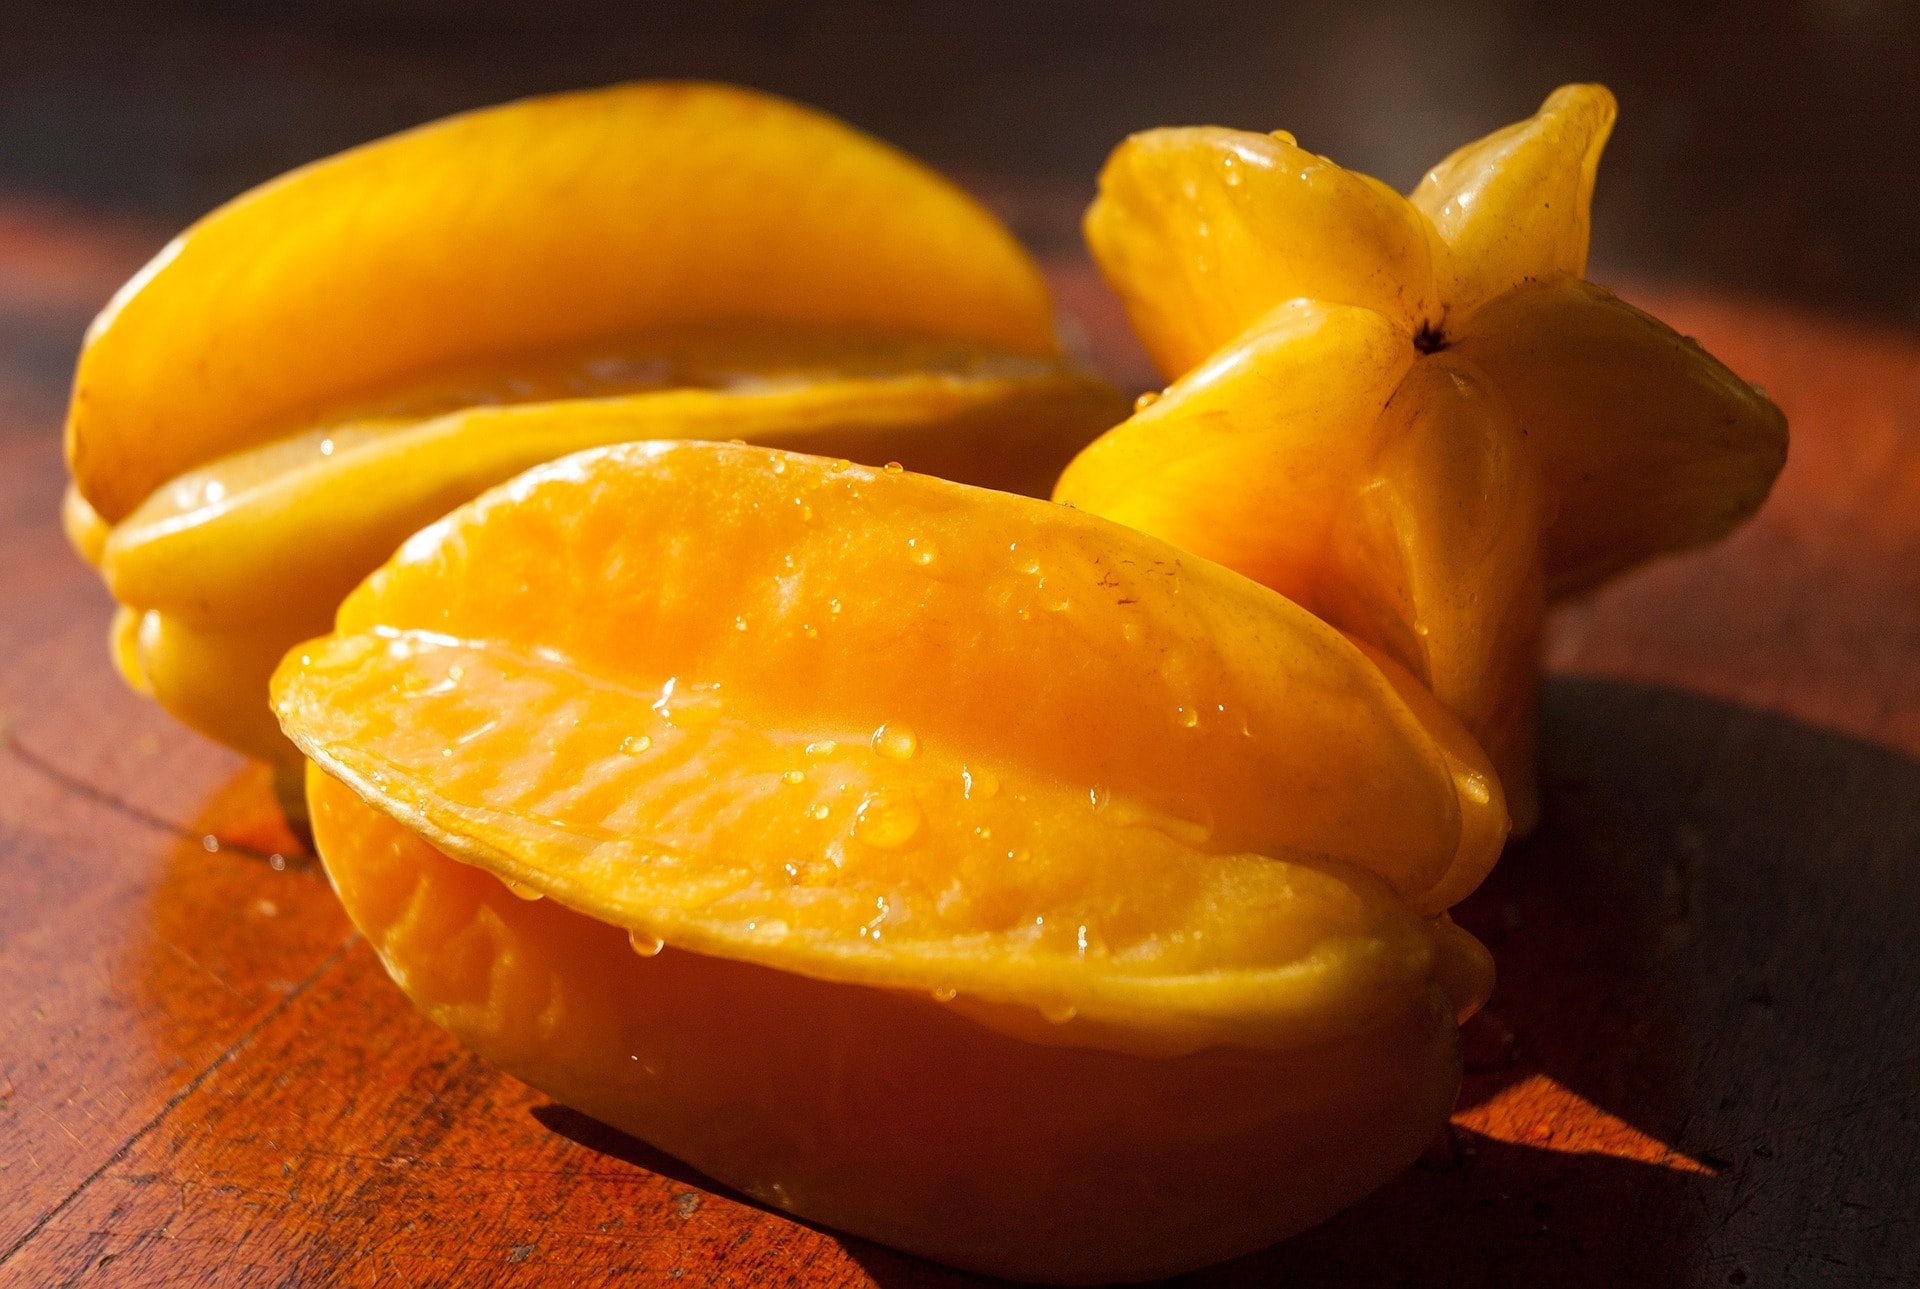 starfruit is called carambola in Costa Rica